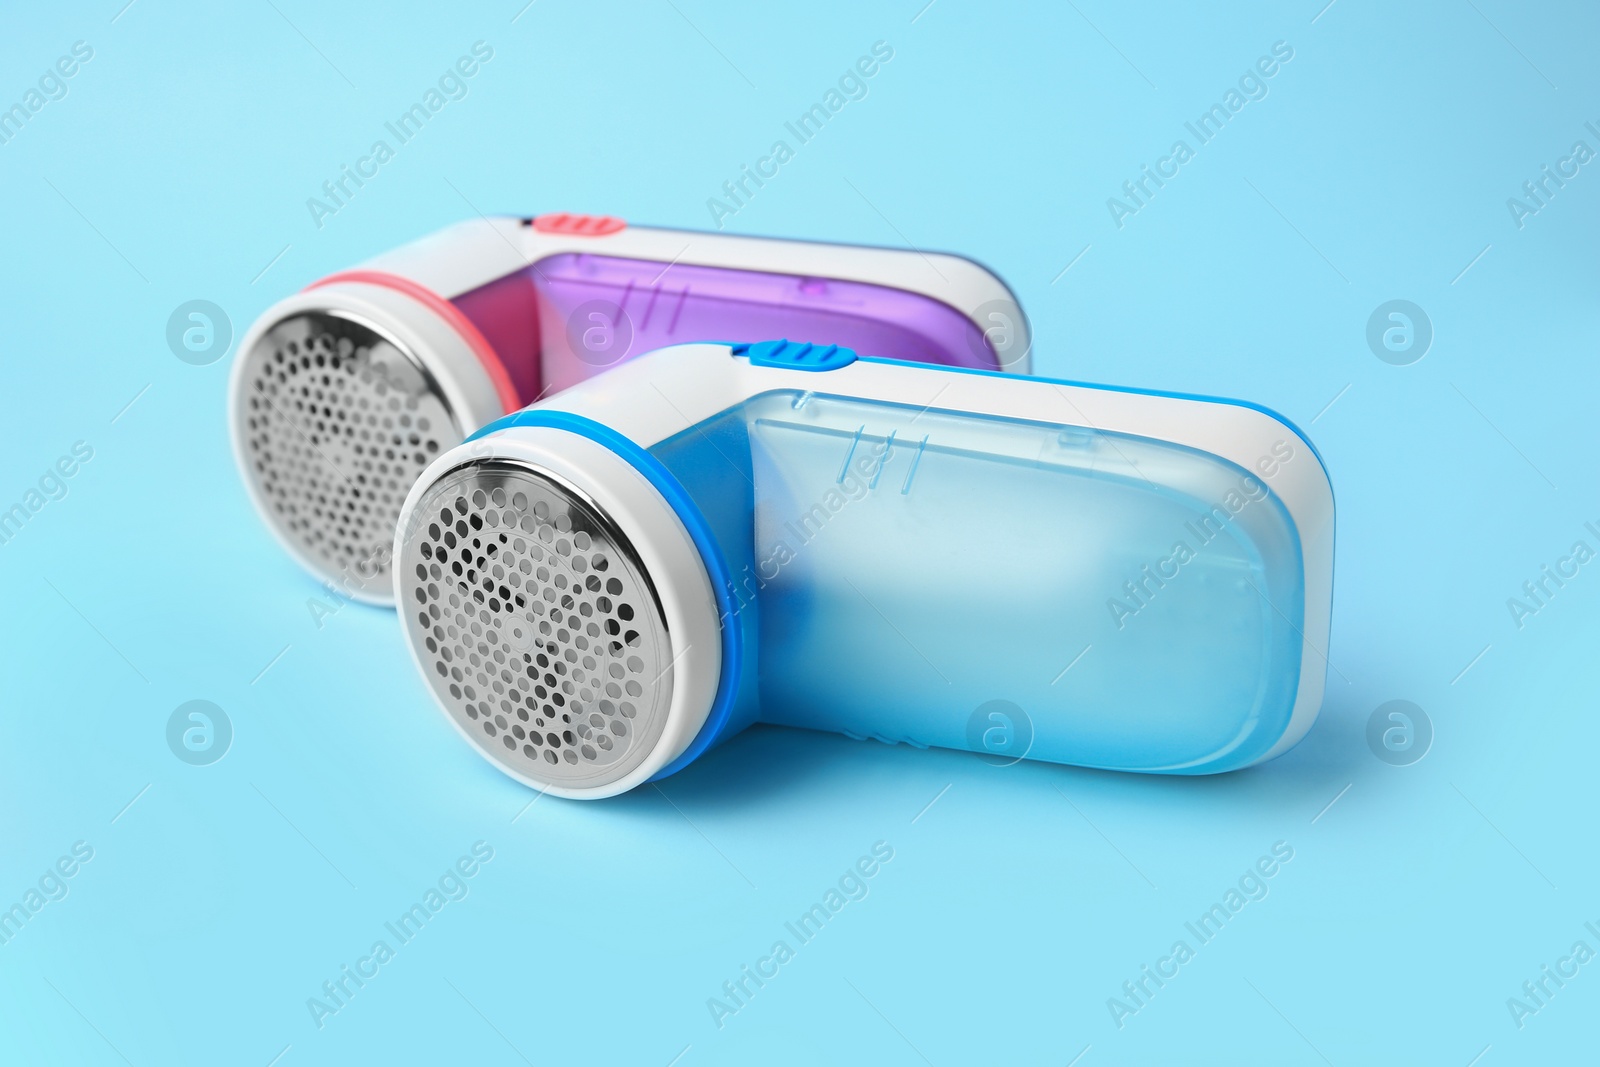 Photo of Modern fabric shavers on light blue background